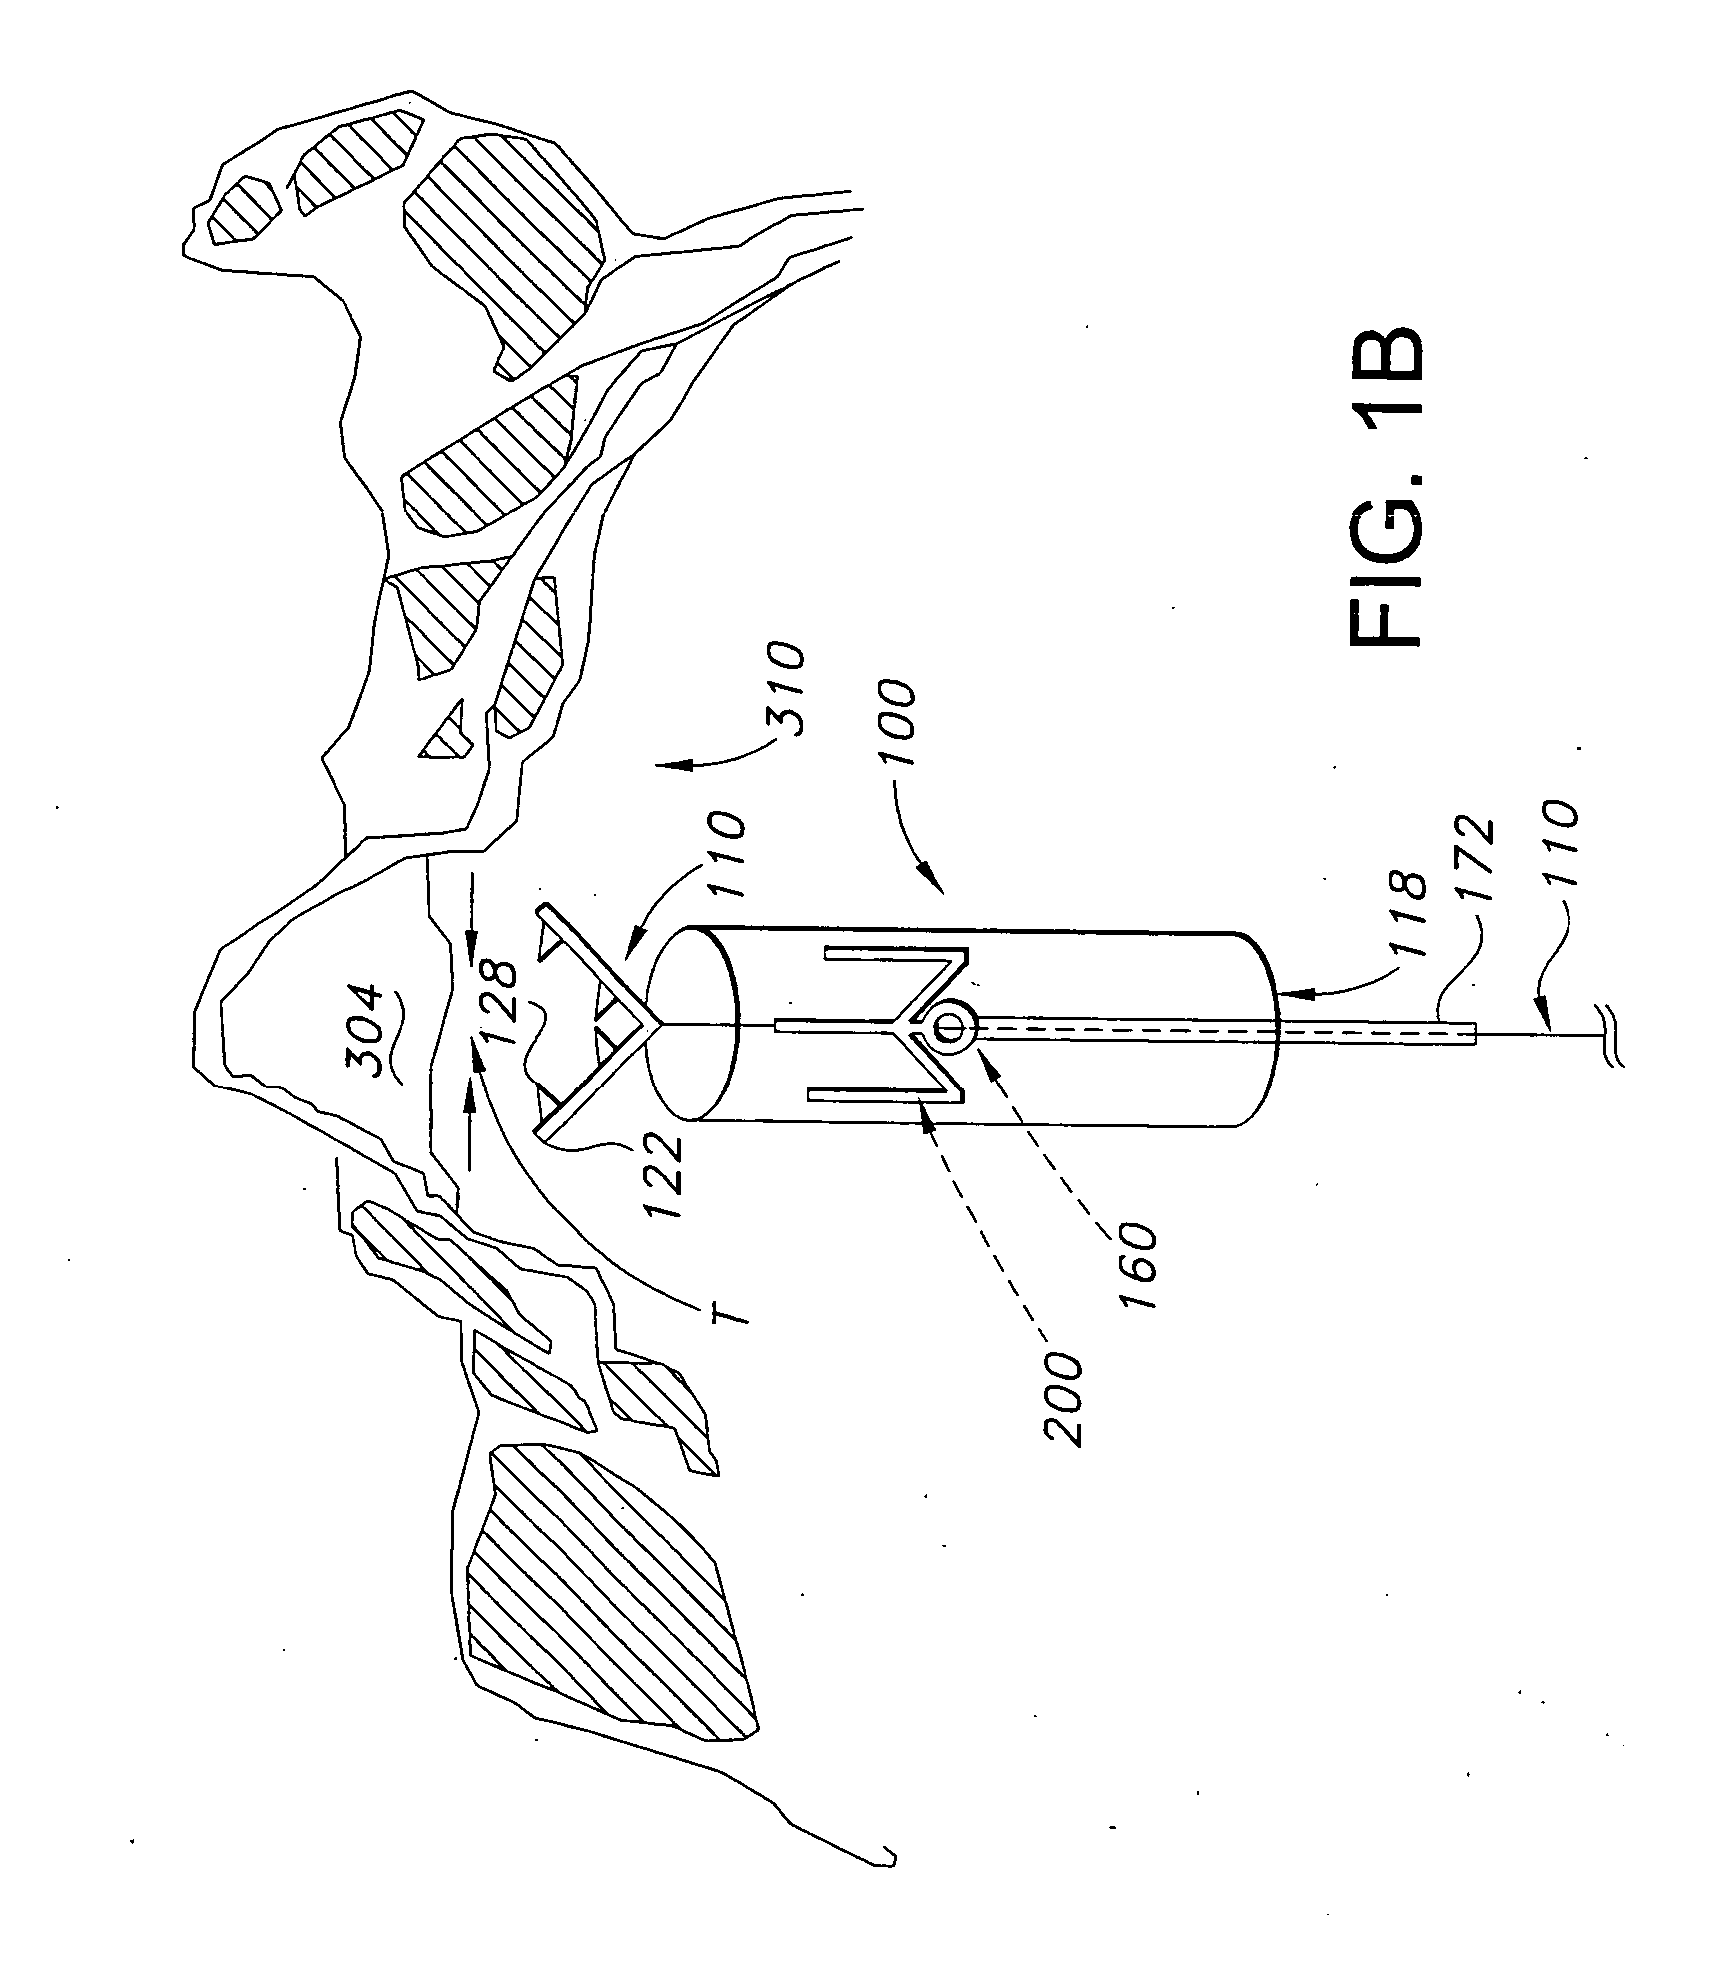 Devices and methods for treating mitral valve regurgitation